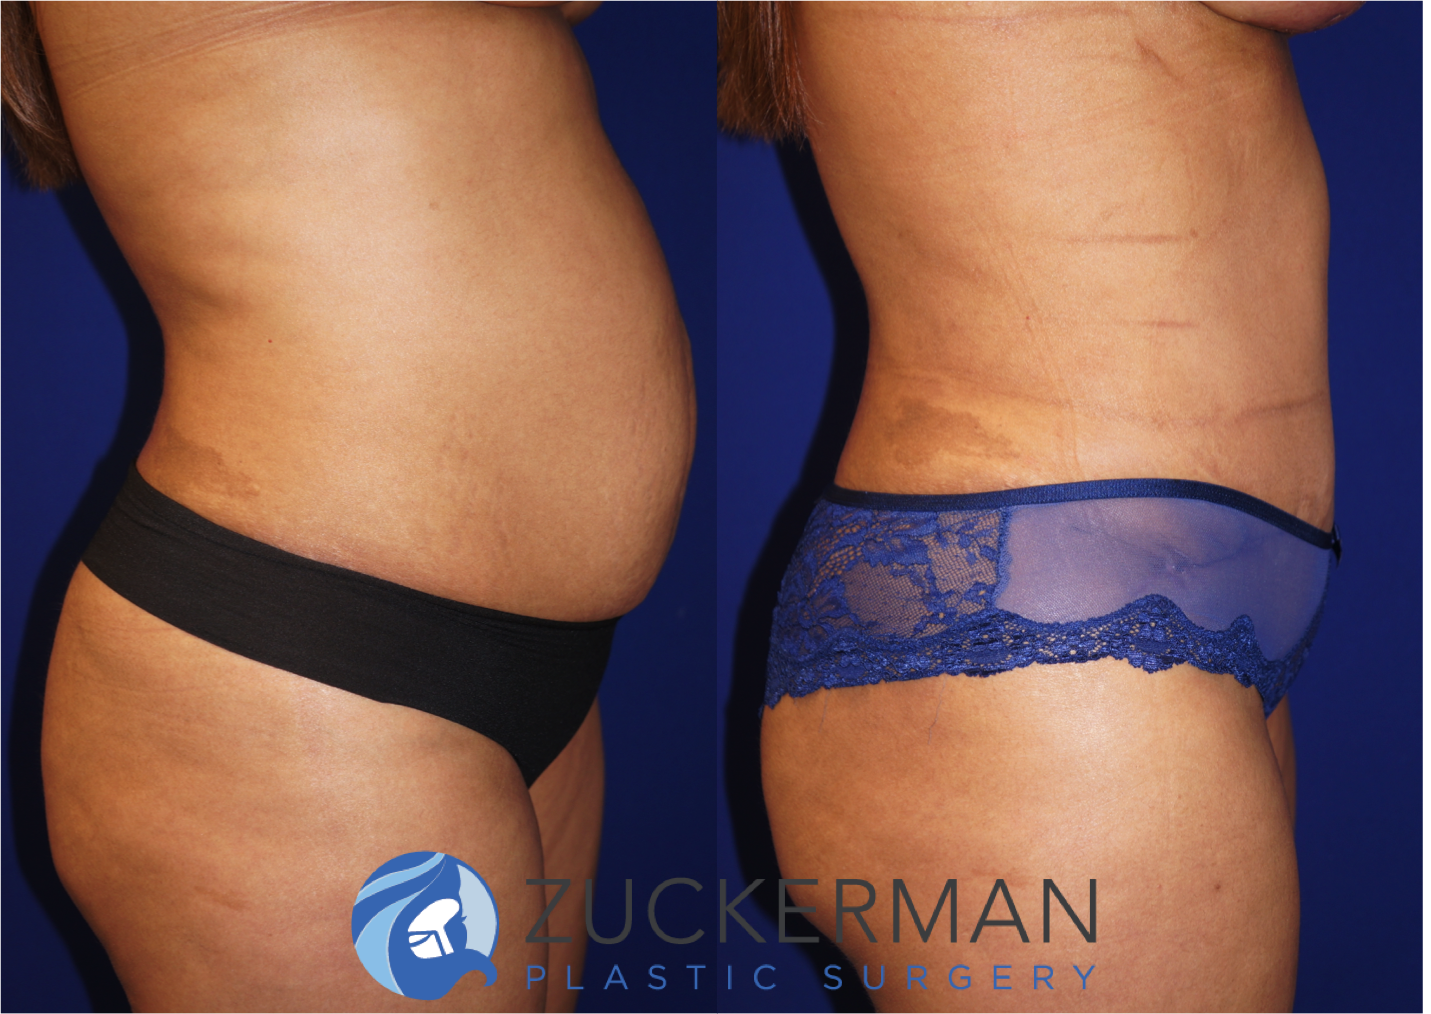 Right profile view of an abdominoplasty (tummy tuck) by Dr. Zuckerman, images taken before surgery and two months after. Includes liposuction to the abdomen and flanks.